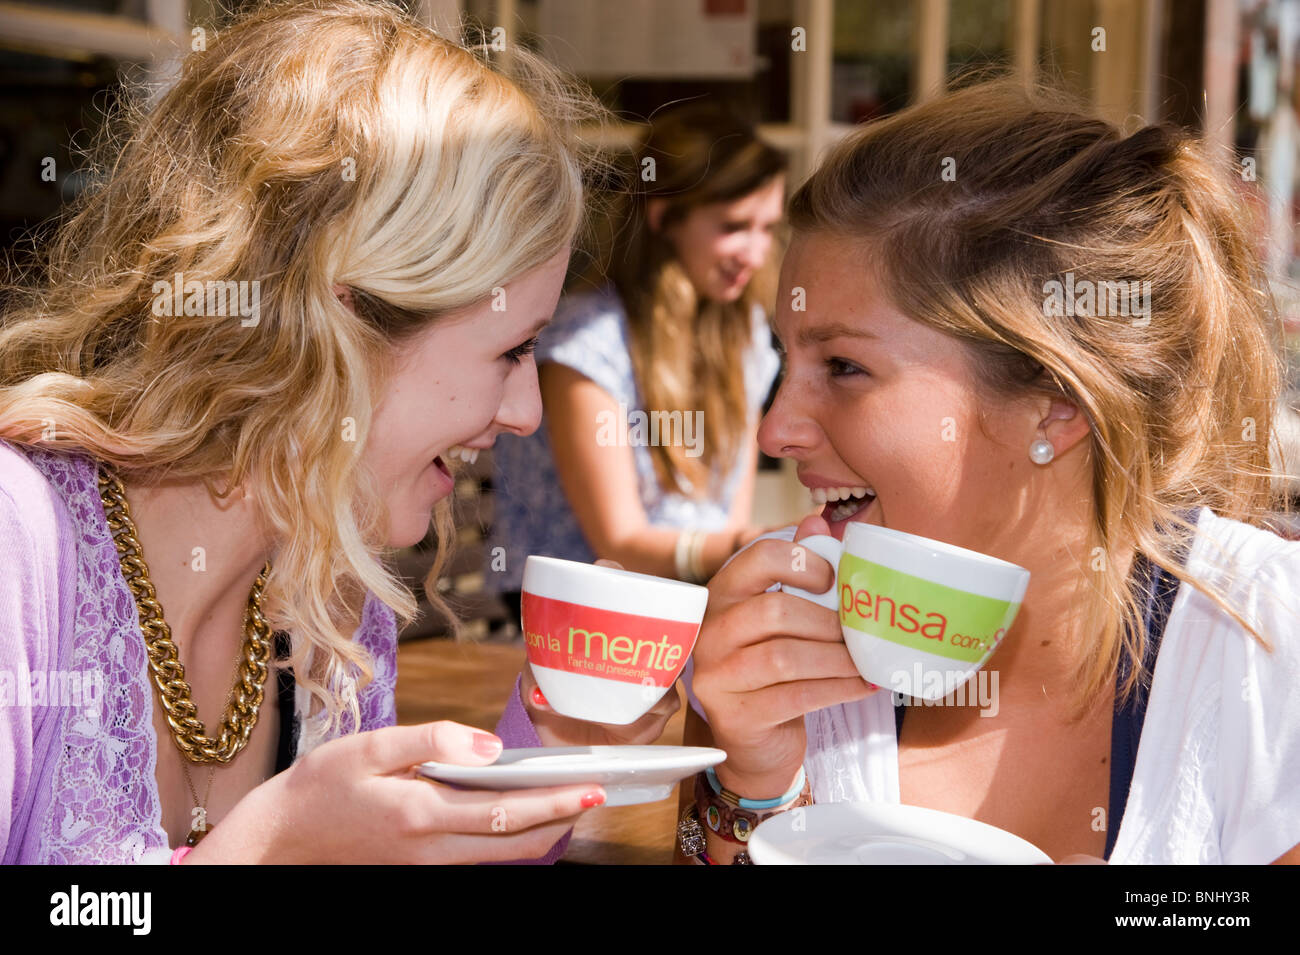 15 16 girl model release teenager break stop café coffee cups friends clap happily friends youth young people fun joke spare Stock Photo